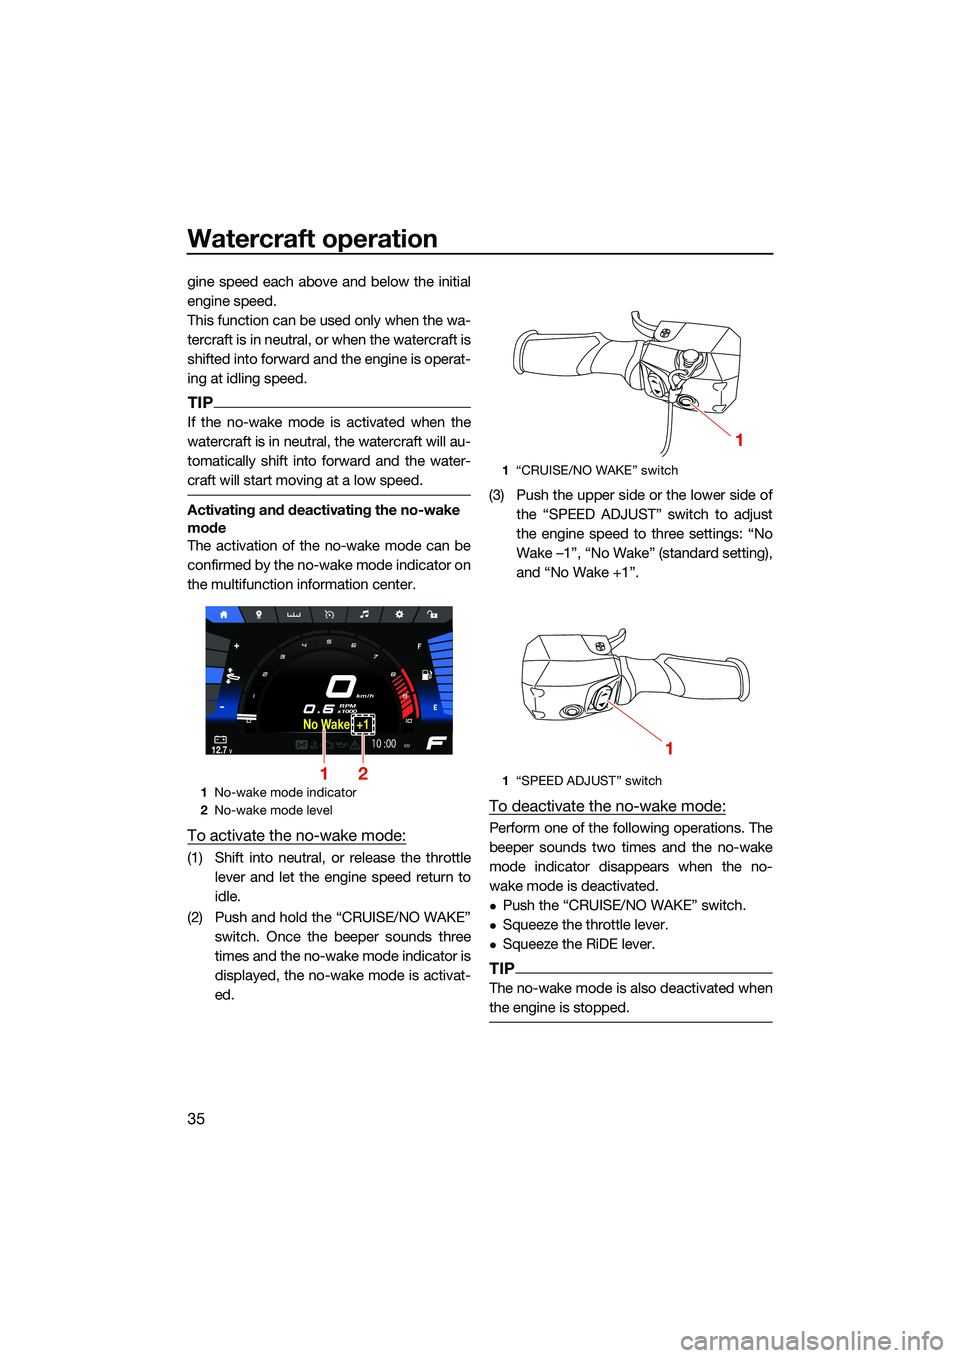 YAMAHA FX HO 2022  Owners Manual Watercraft operation
35
gine speed each above and below the initial
engine speed.
This function can be used only when the wa-
tercraft is in neutral, or when the watercraft is
shifted into forward and